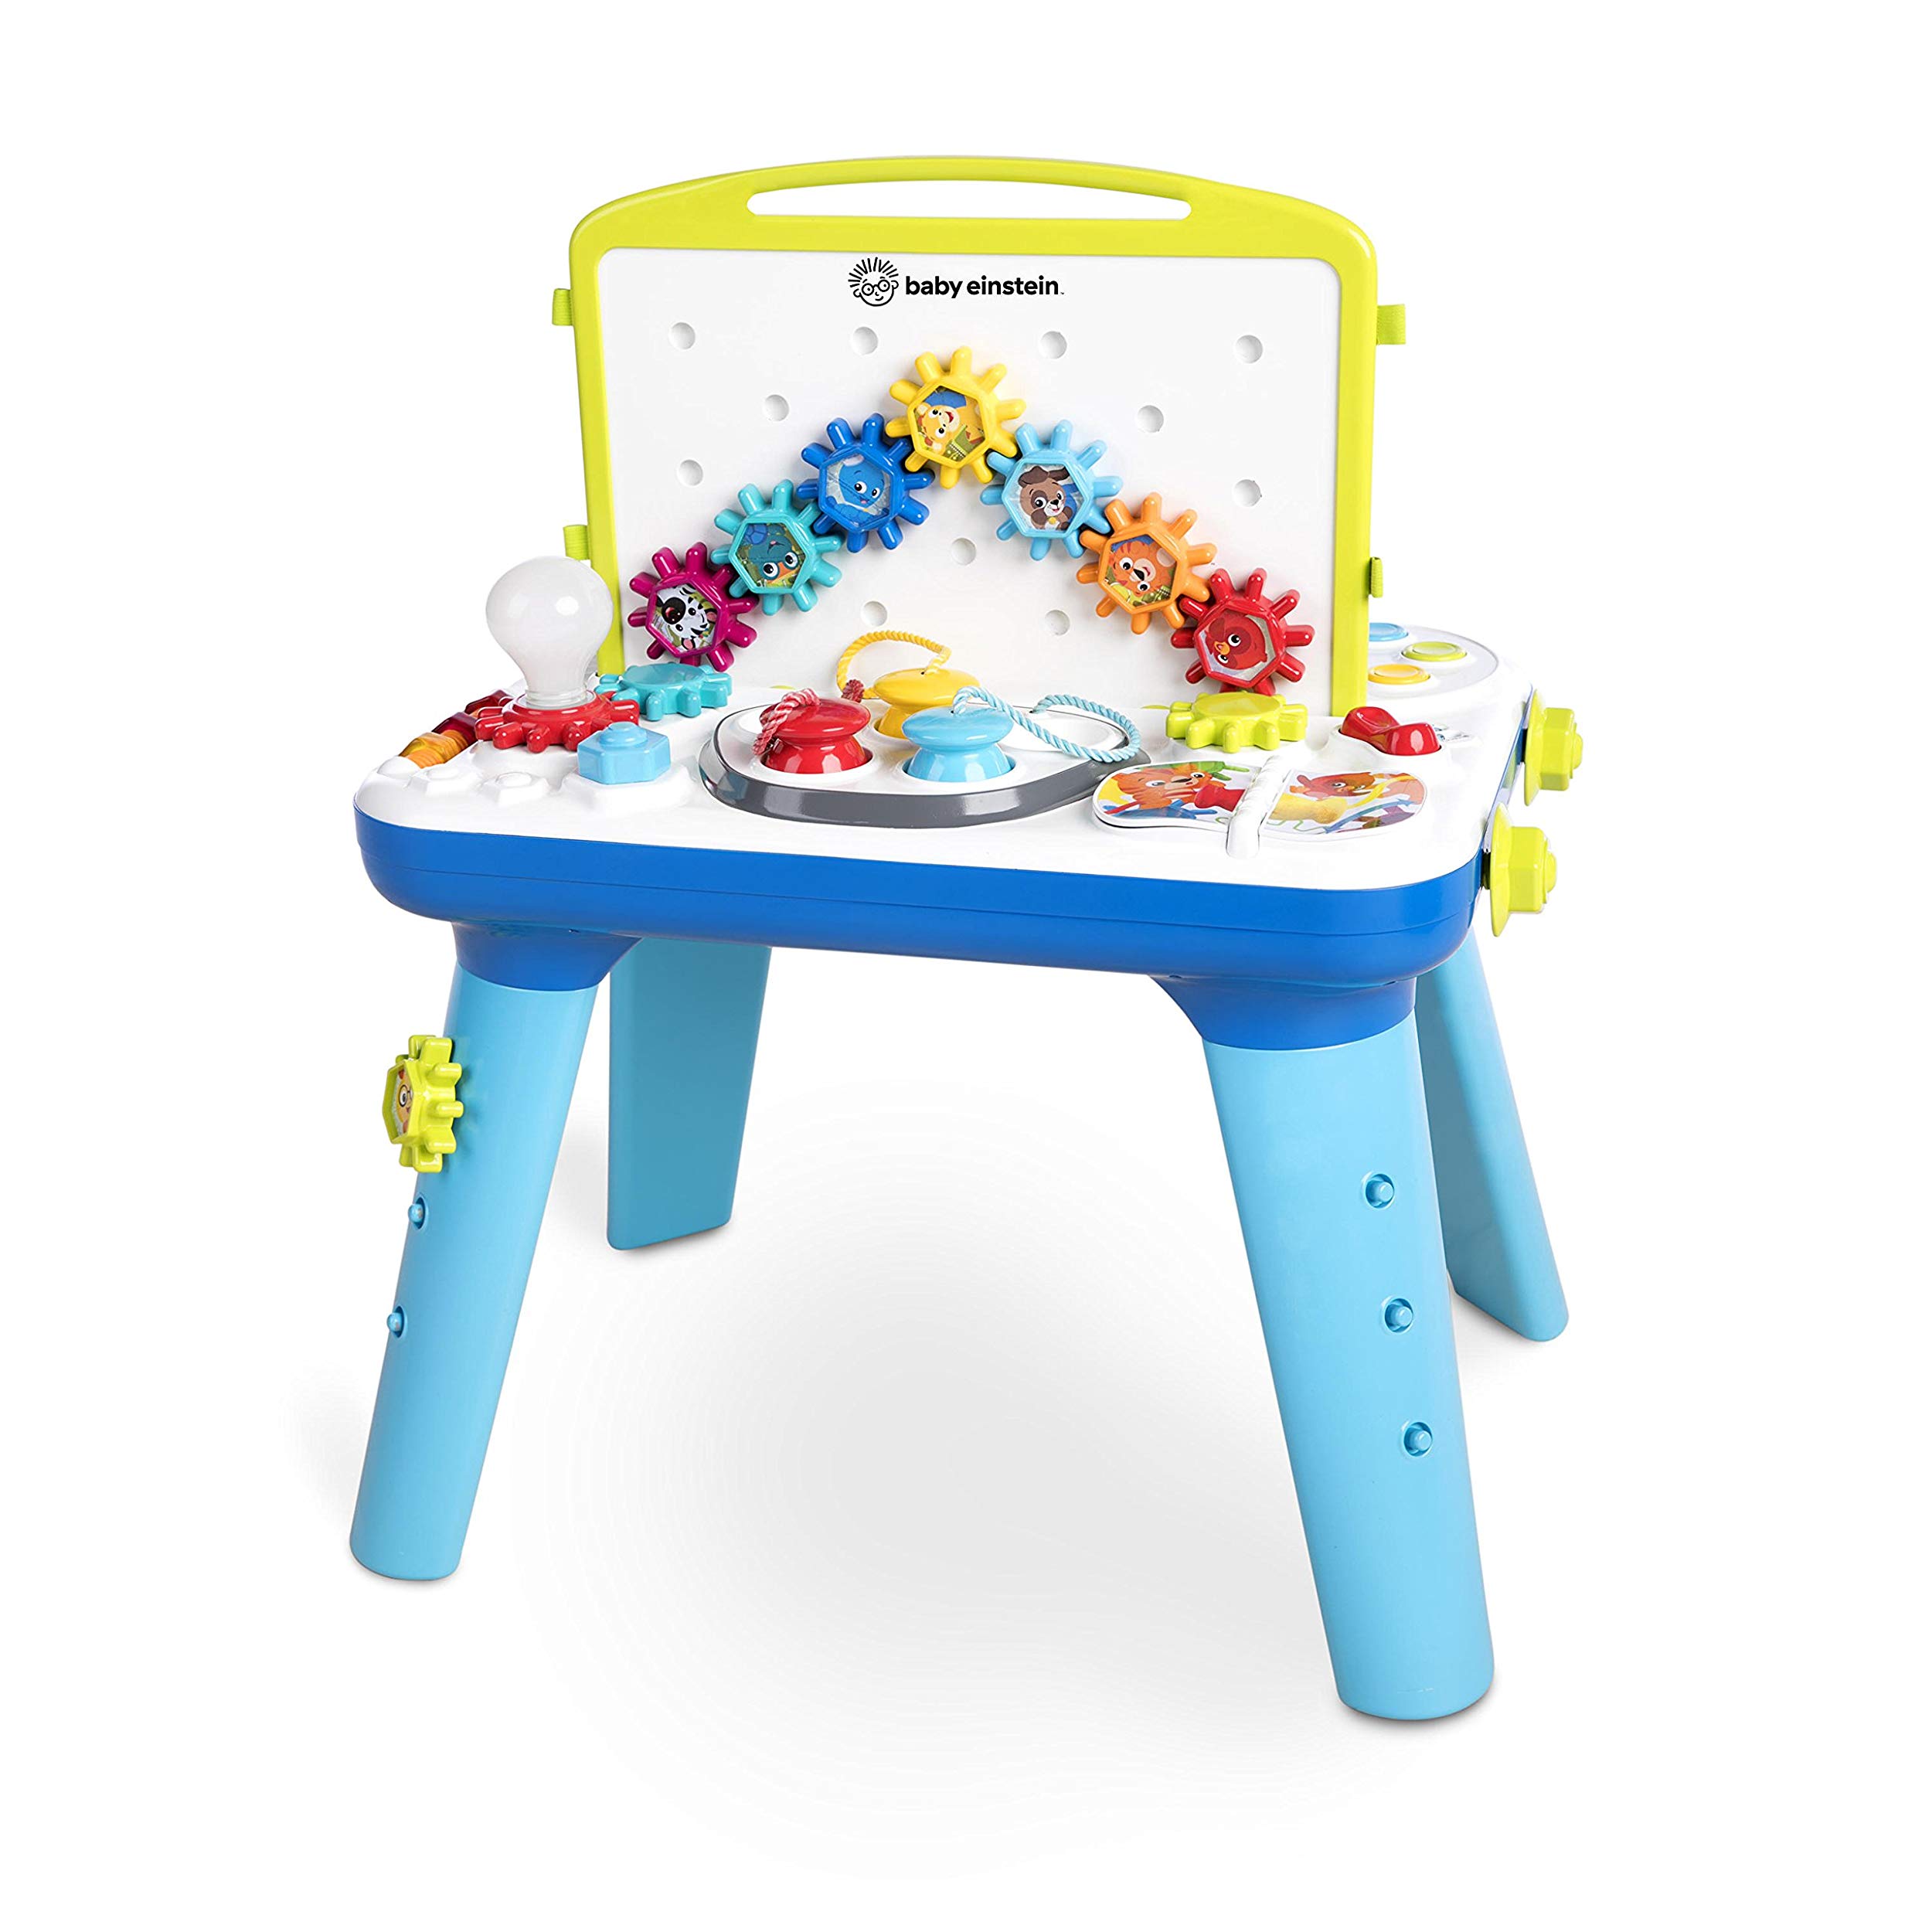 Discovery Kids Baby Einstein Curiosity University Table Activity Station